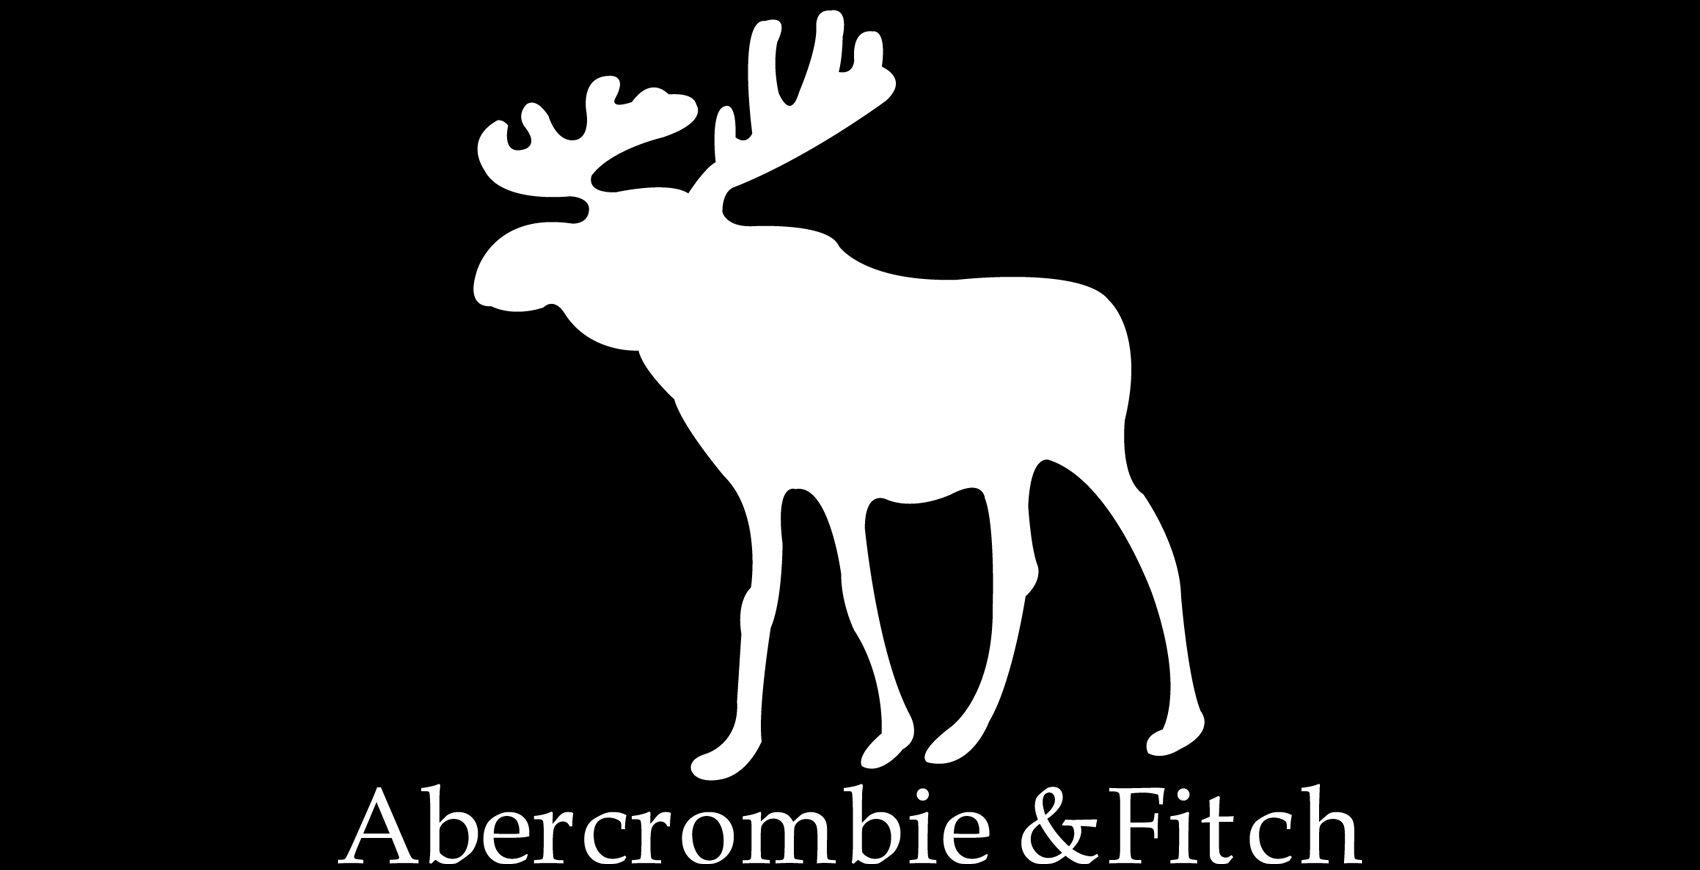 Abercrombie Logo - Abercrombie and Fitch Logo, Abercrombie and Fitch Symbol Meaning ...